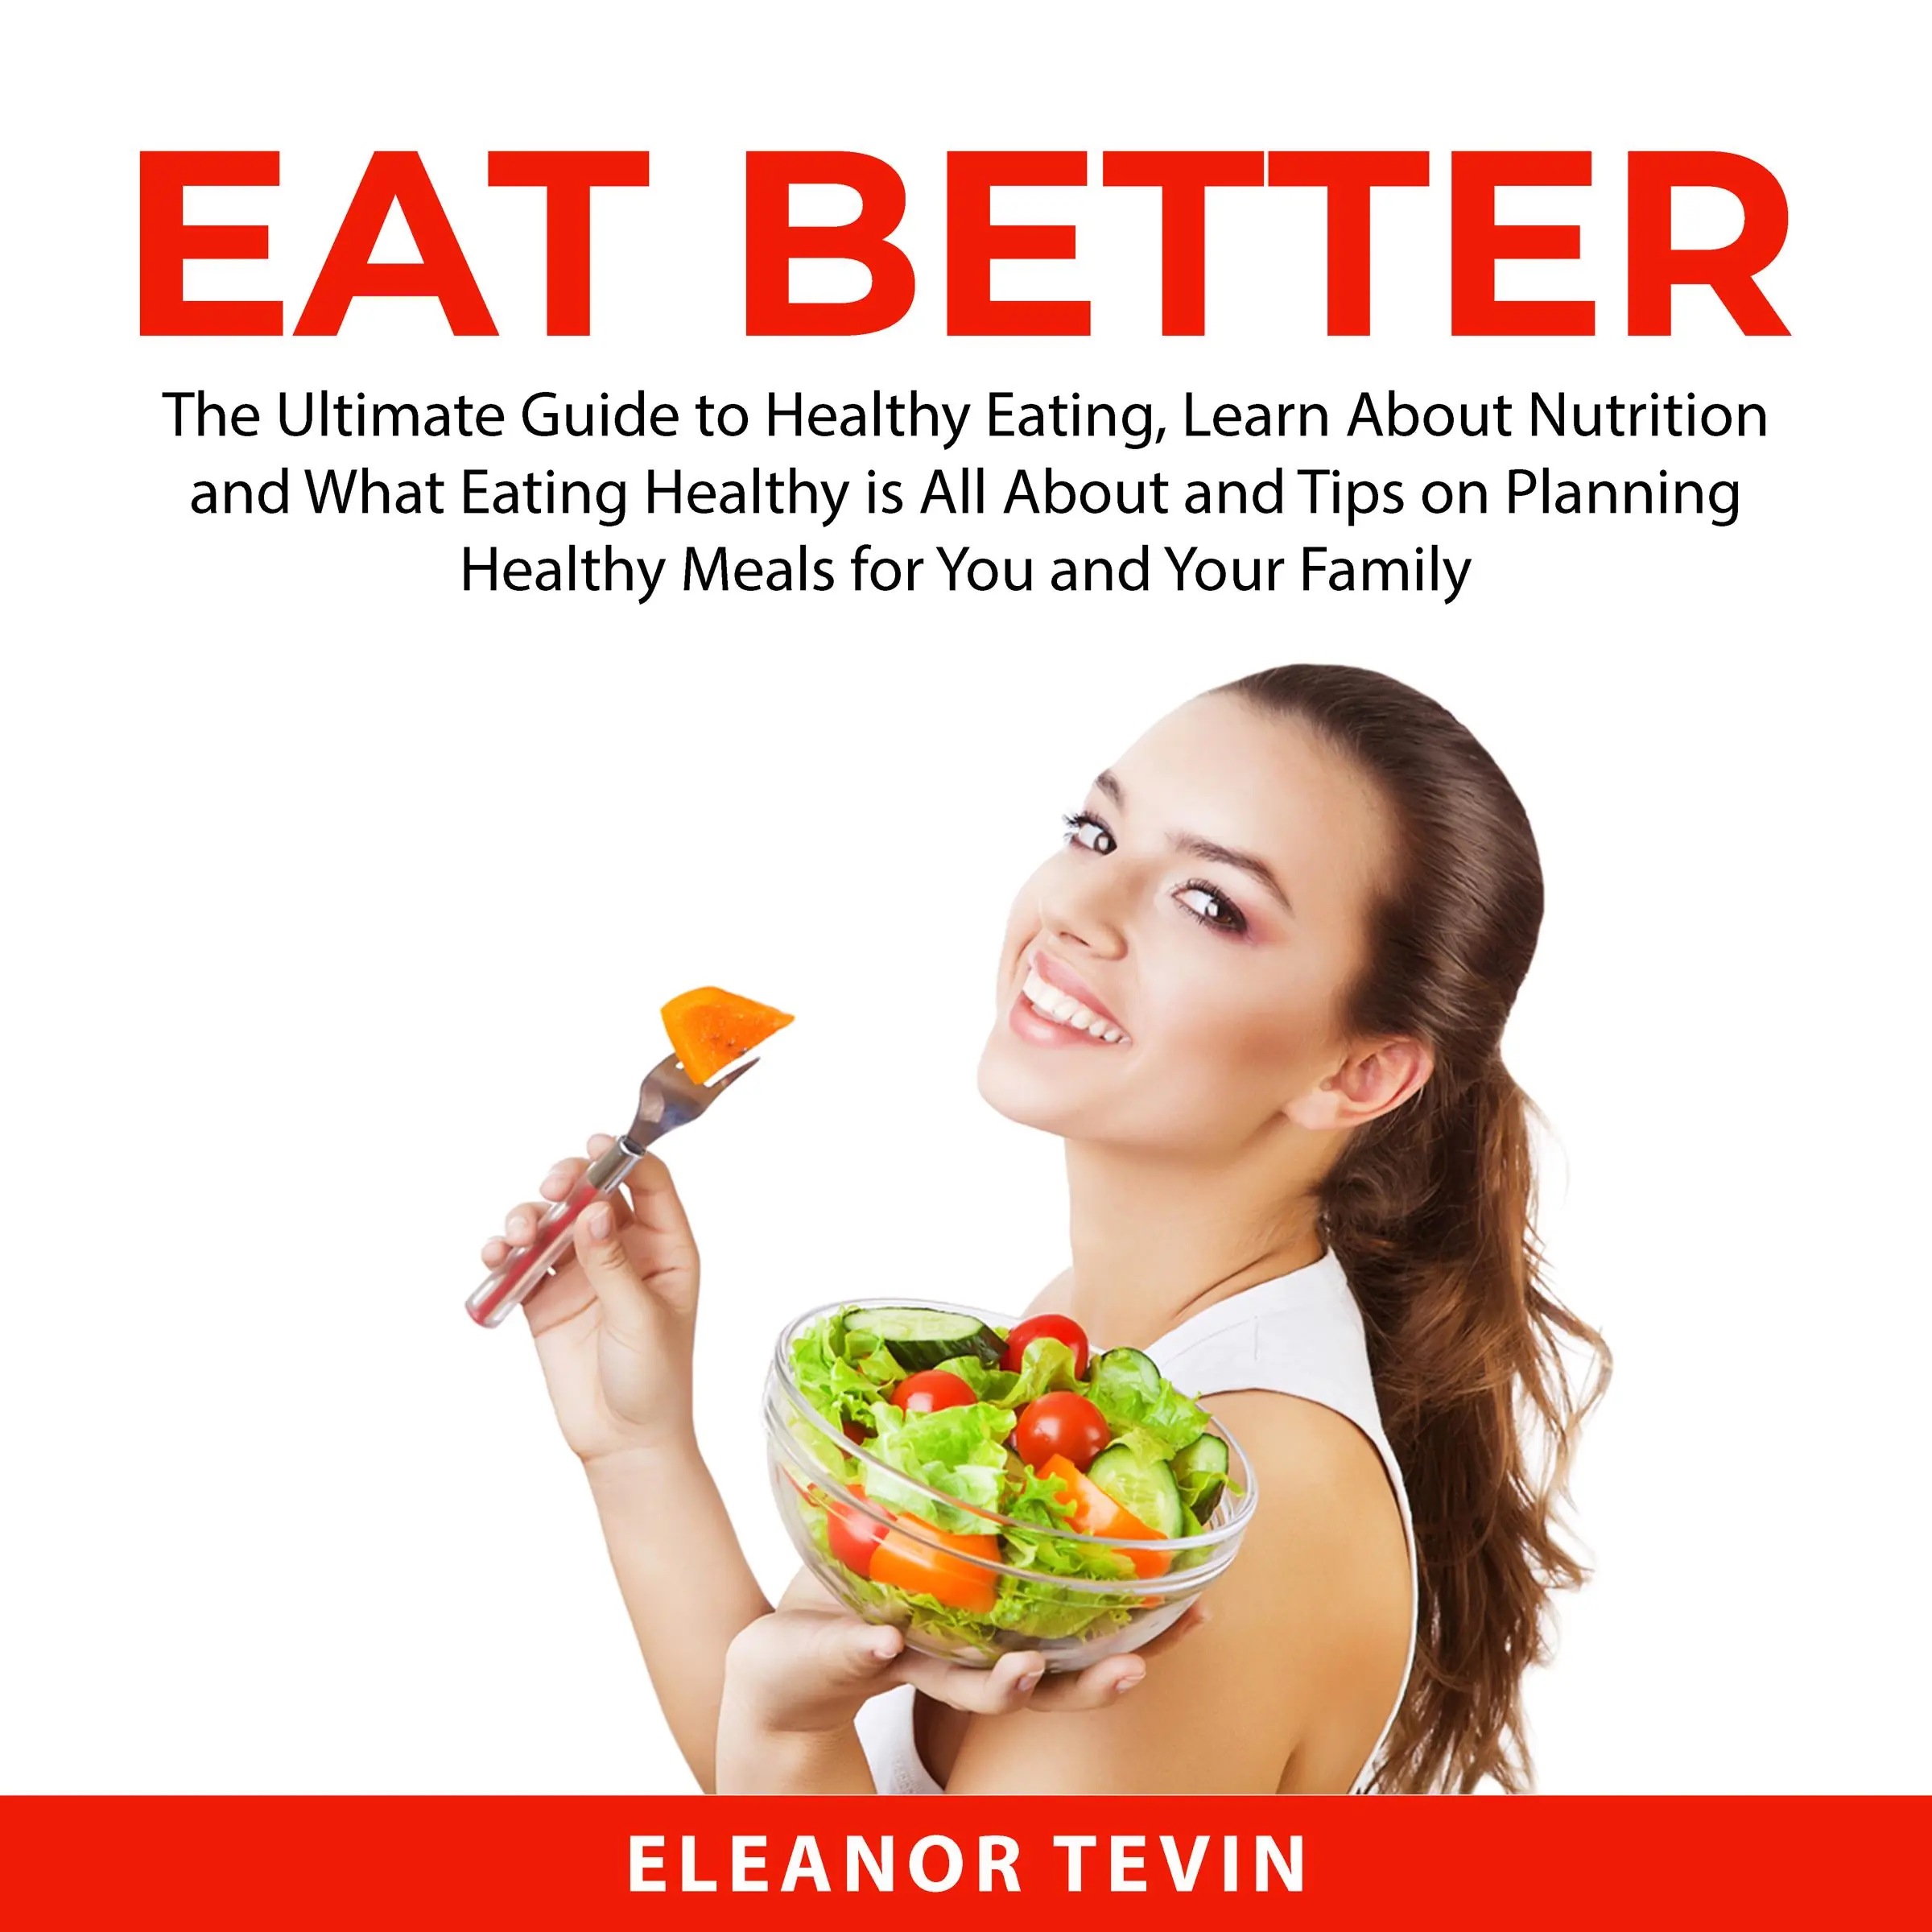 Eat Better: The Ultimate Guide to Healthy Eating, Learn About Nutrition and What Eating Healthy is All About and Tips on Planning Healthy Meals for You and Your Family Audiobook by Eleanor Tevin